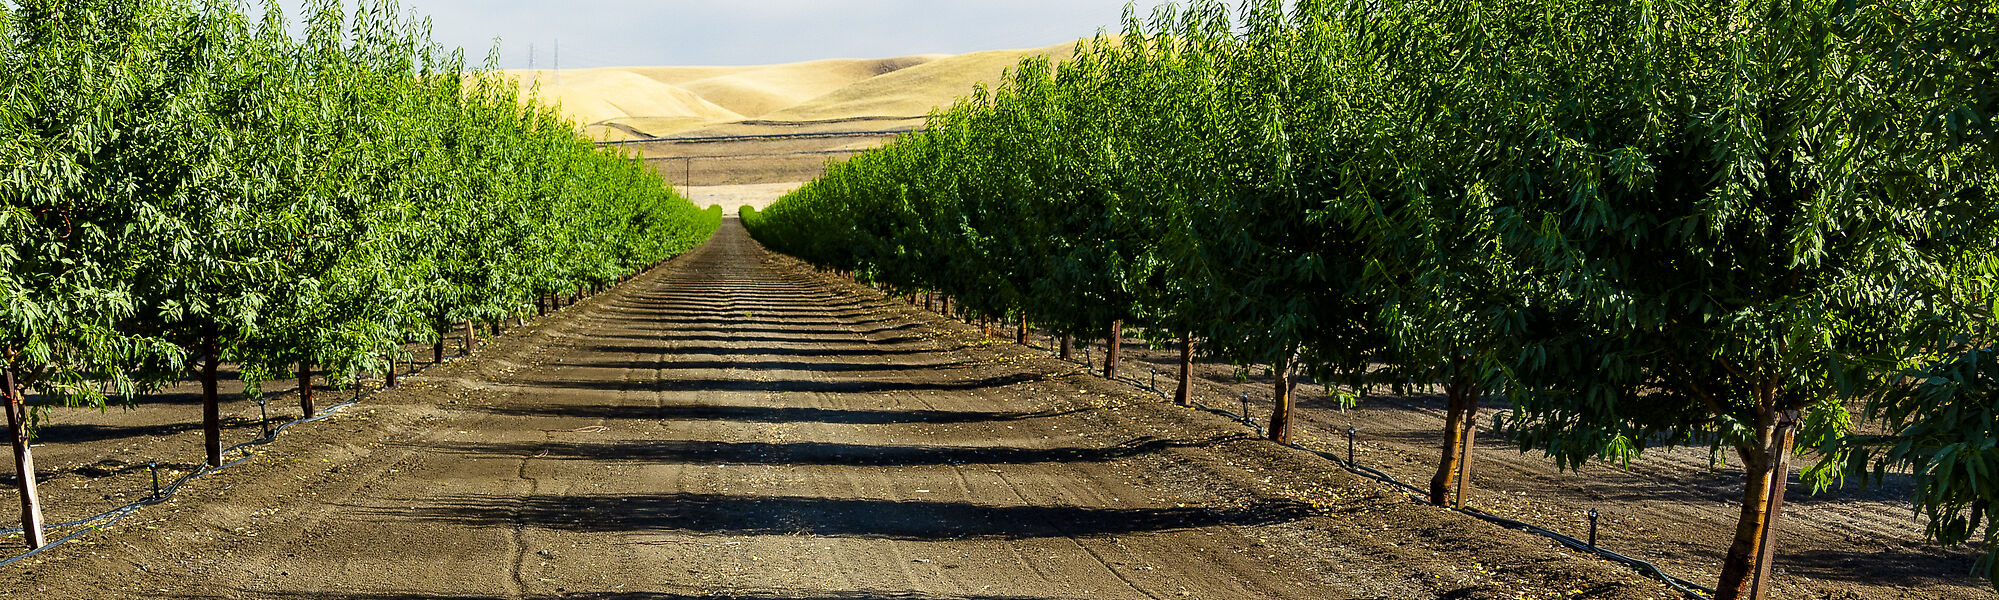 The Nelson S7 Spinner sprinkler providing wide coverage irrigation solution for a  California Almond orchard